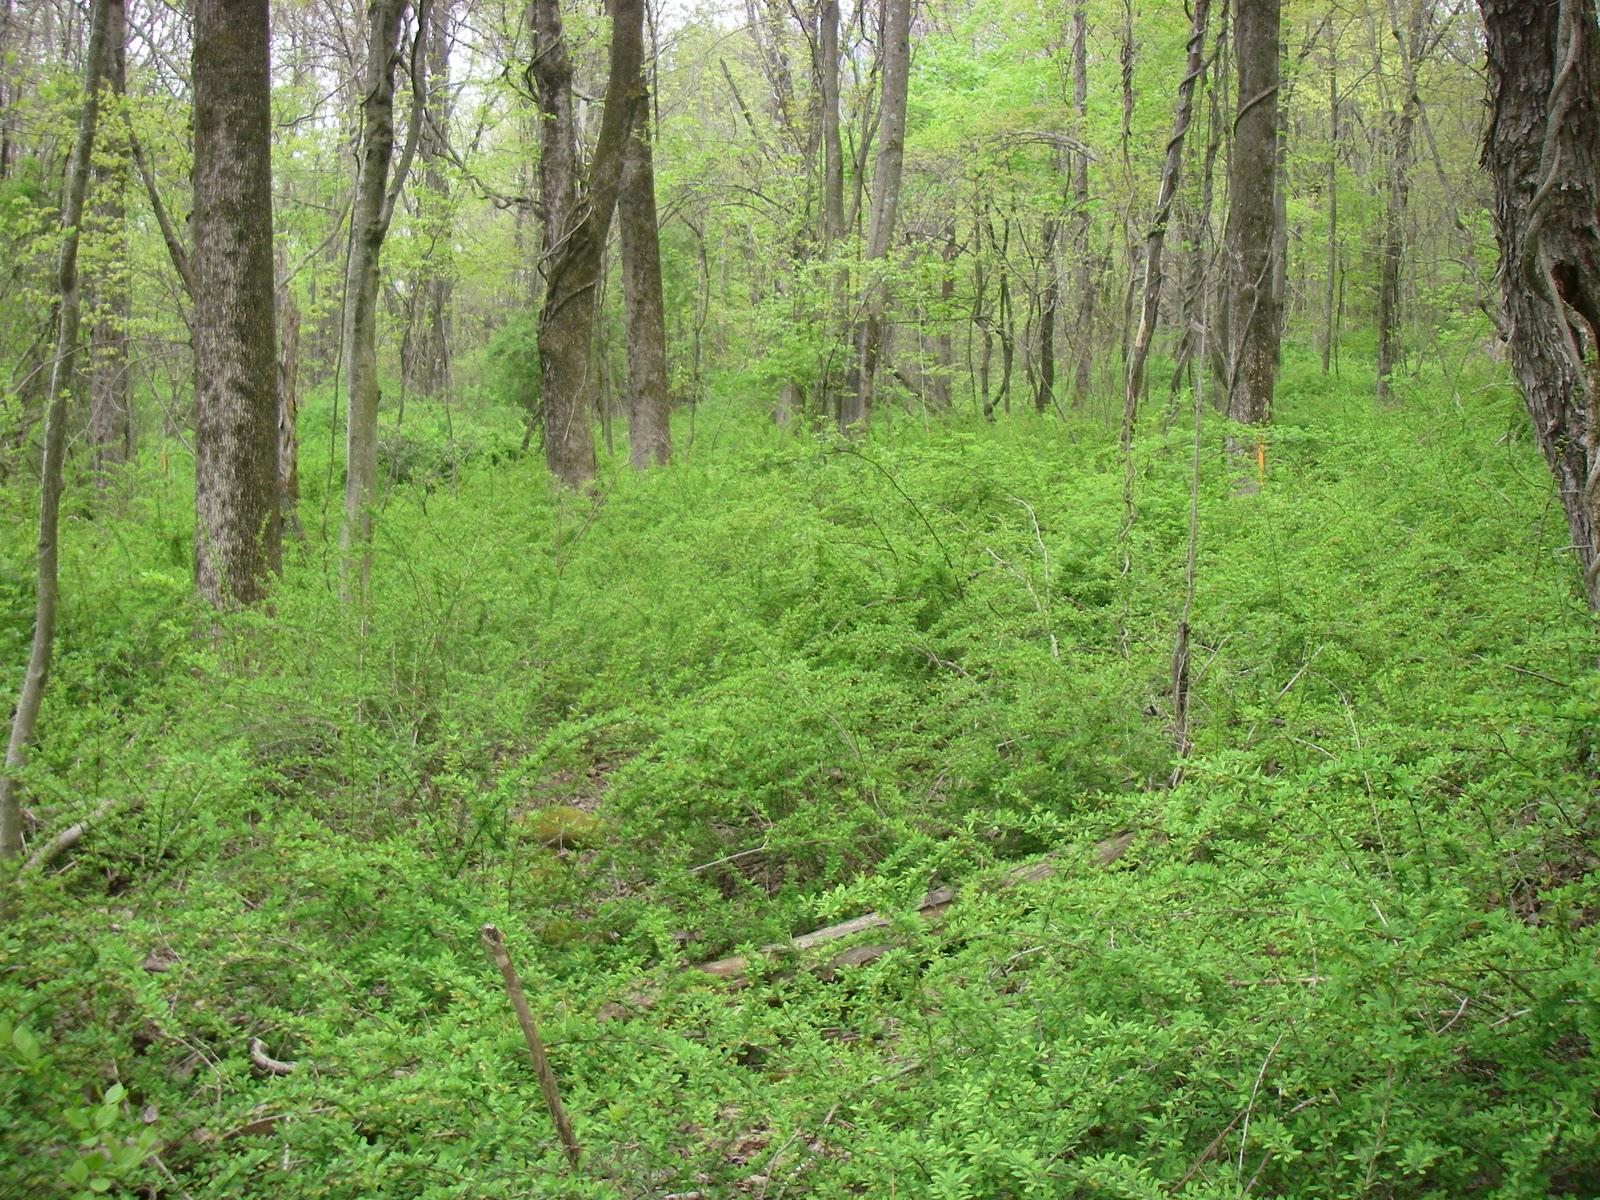 Japanese barberry - a pervasive threat to New Jersey's forests